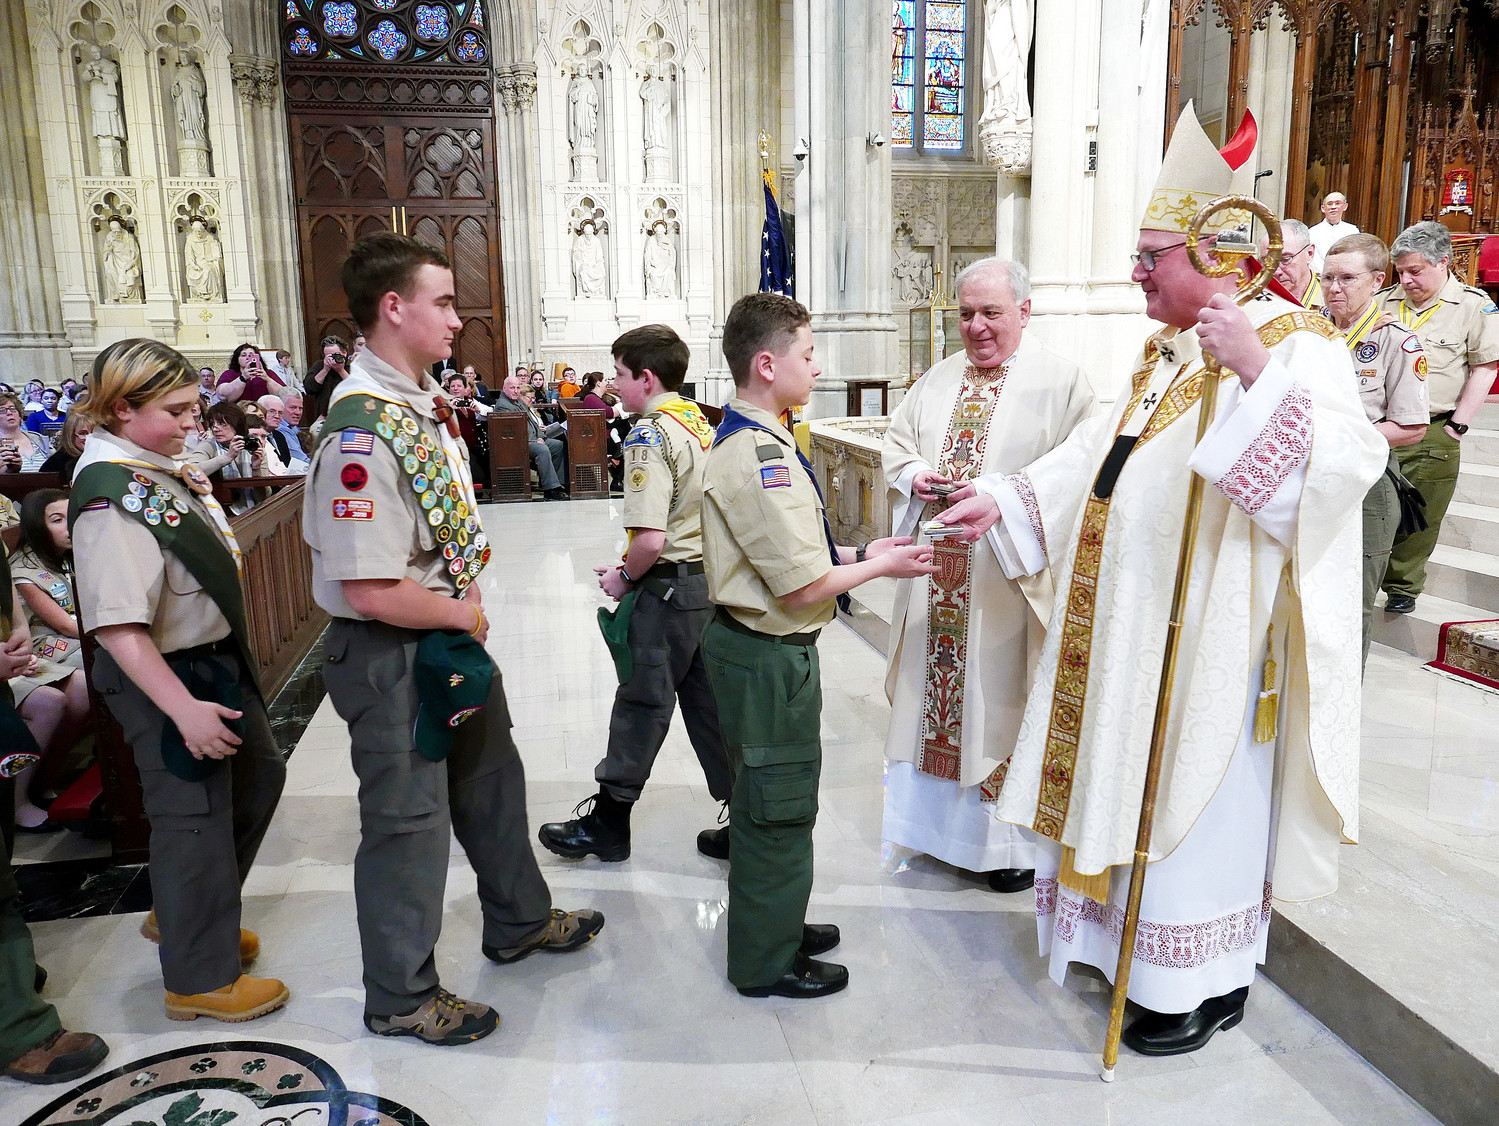 Cardinal Dolan presents medals to the scouts with assistance from Msgr. Anthony Marchitelli, scouting chaplain.